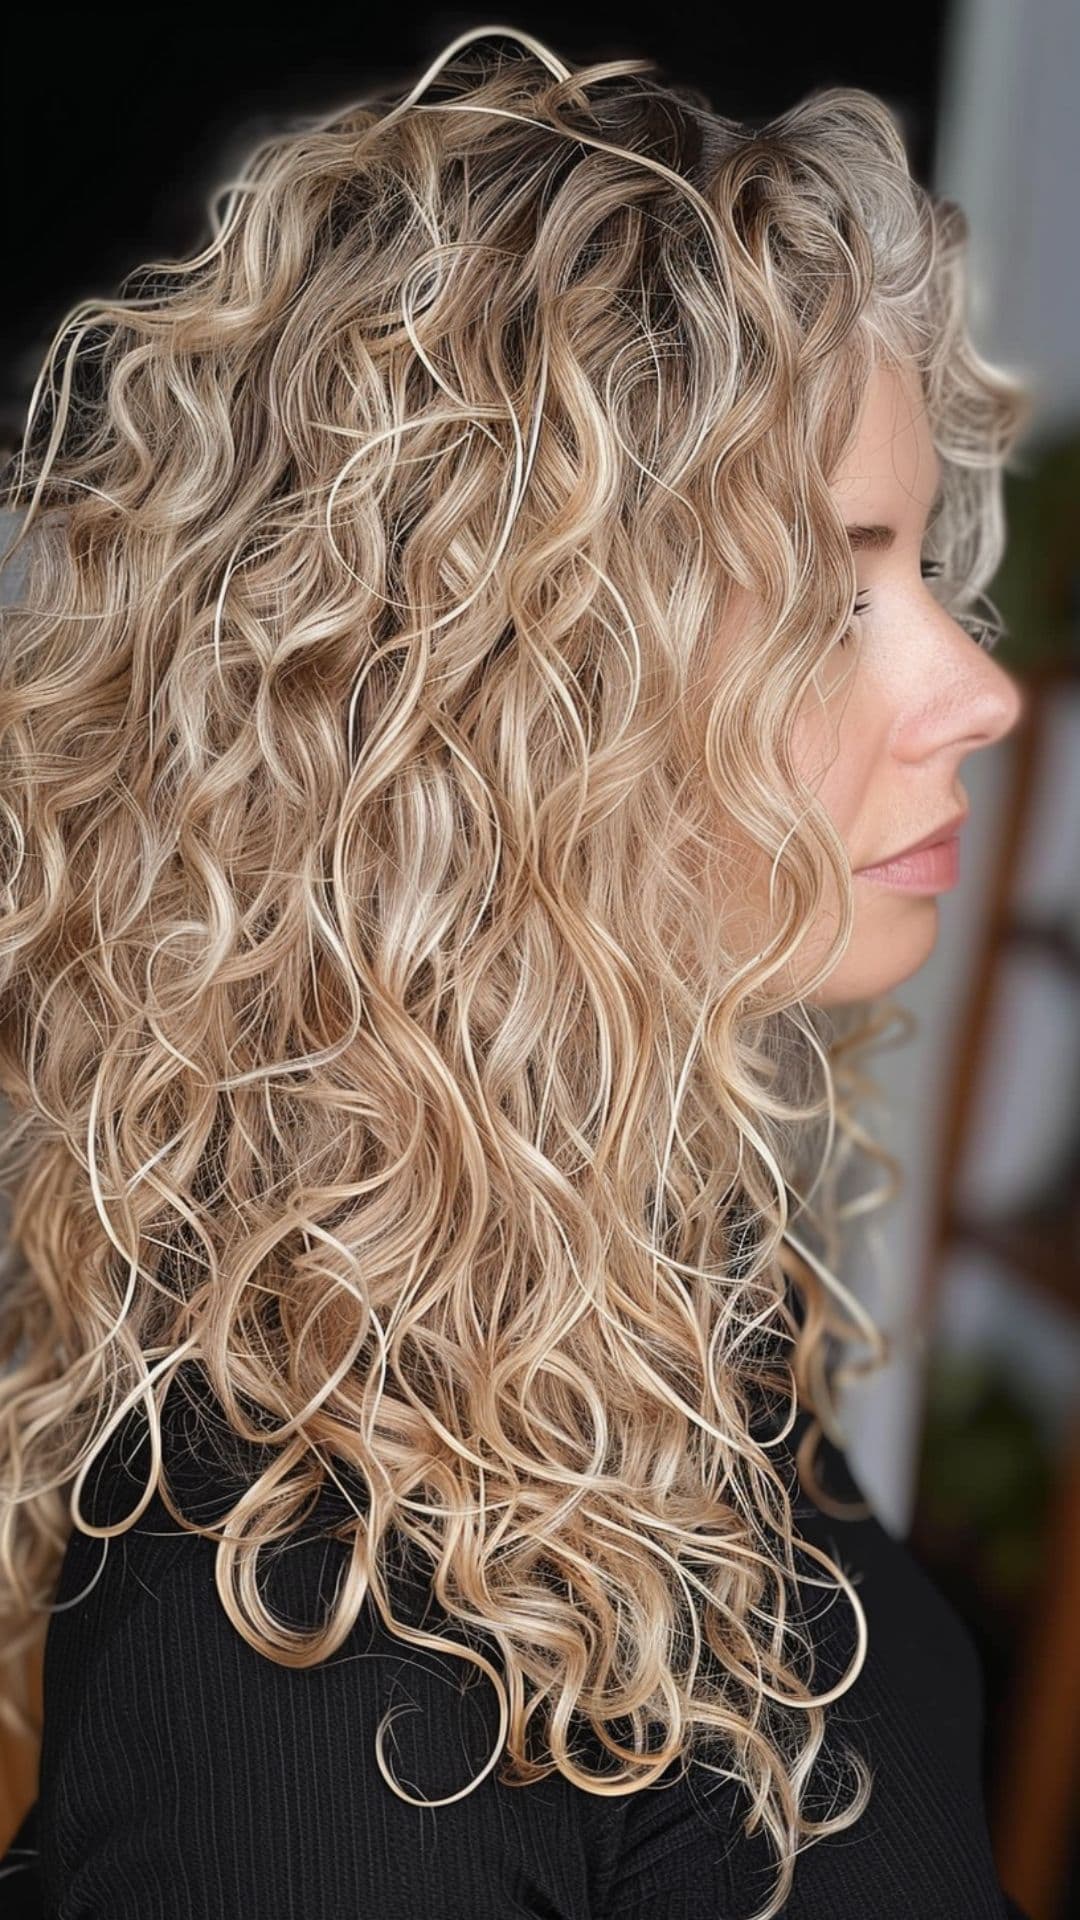 A woman modelling an icy pearl blonde curly hair.